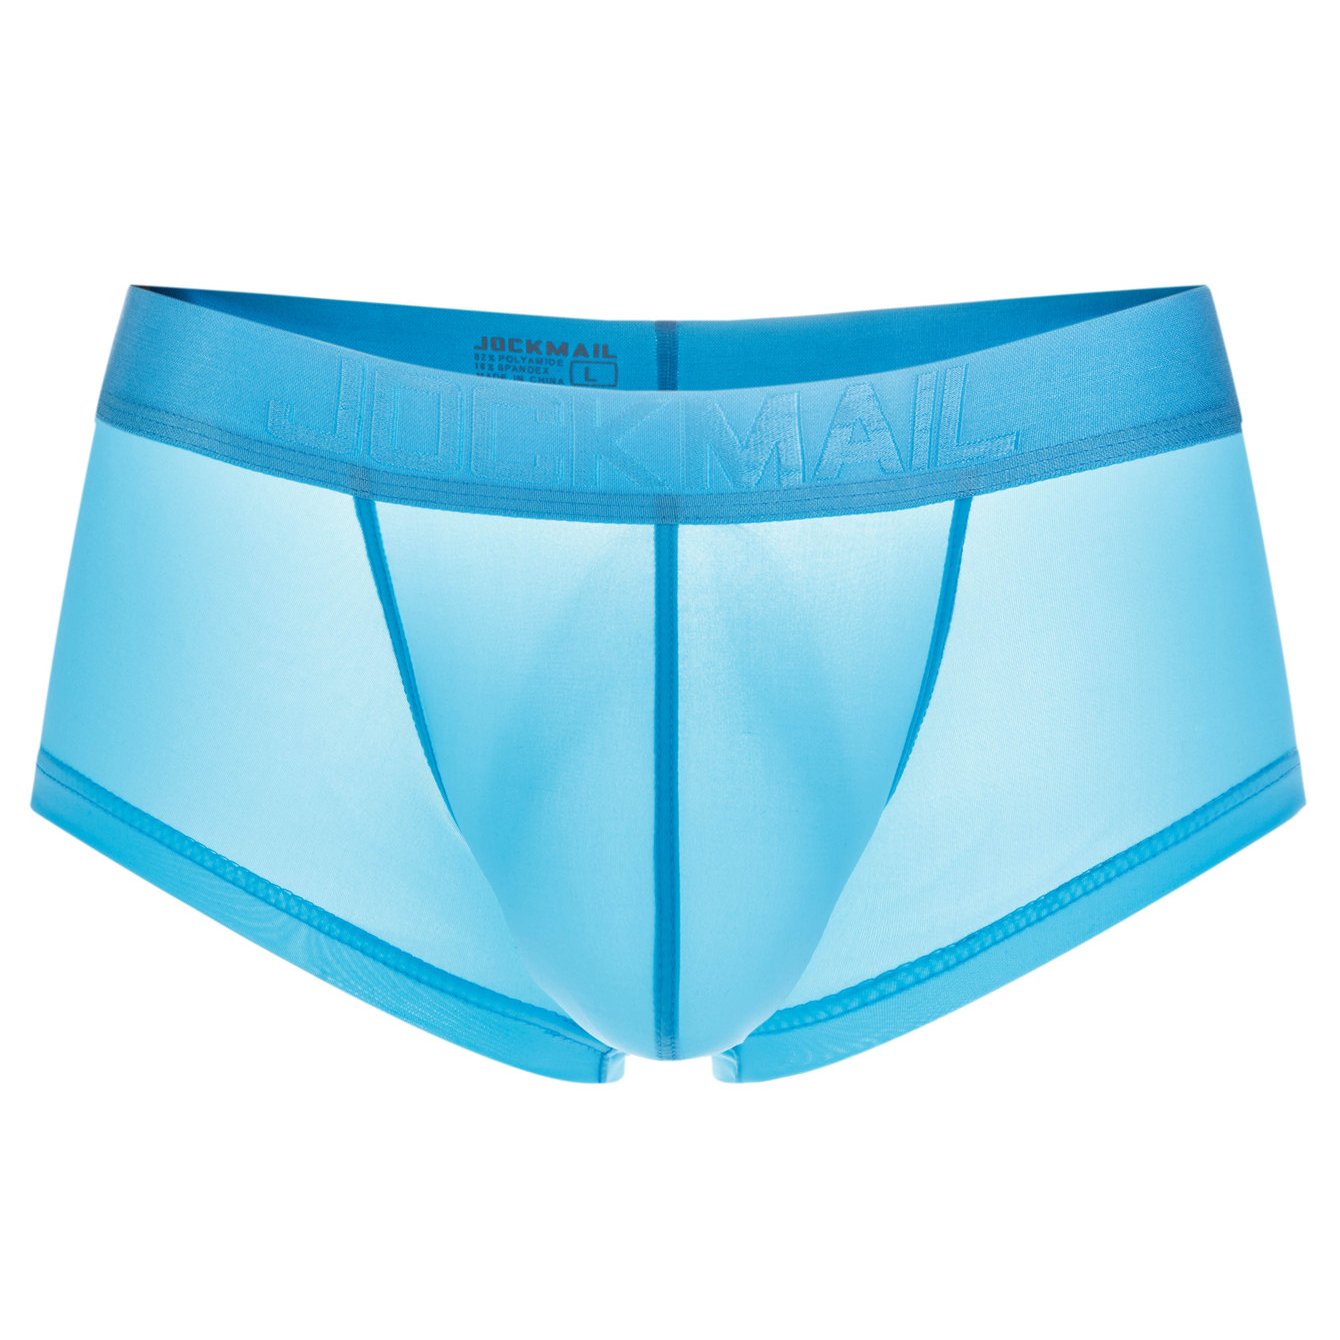 Sunnymall Men Panties Solid Color Smooth Stretch Seamless Glossy